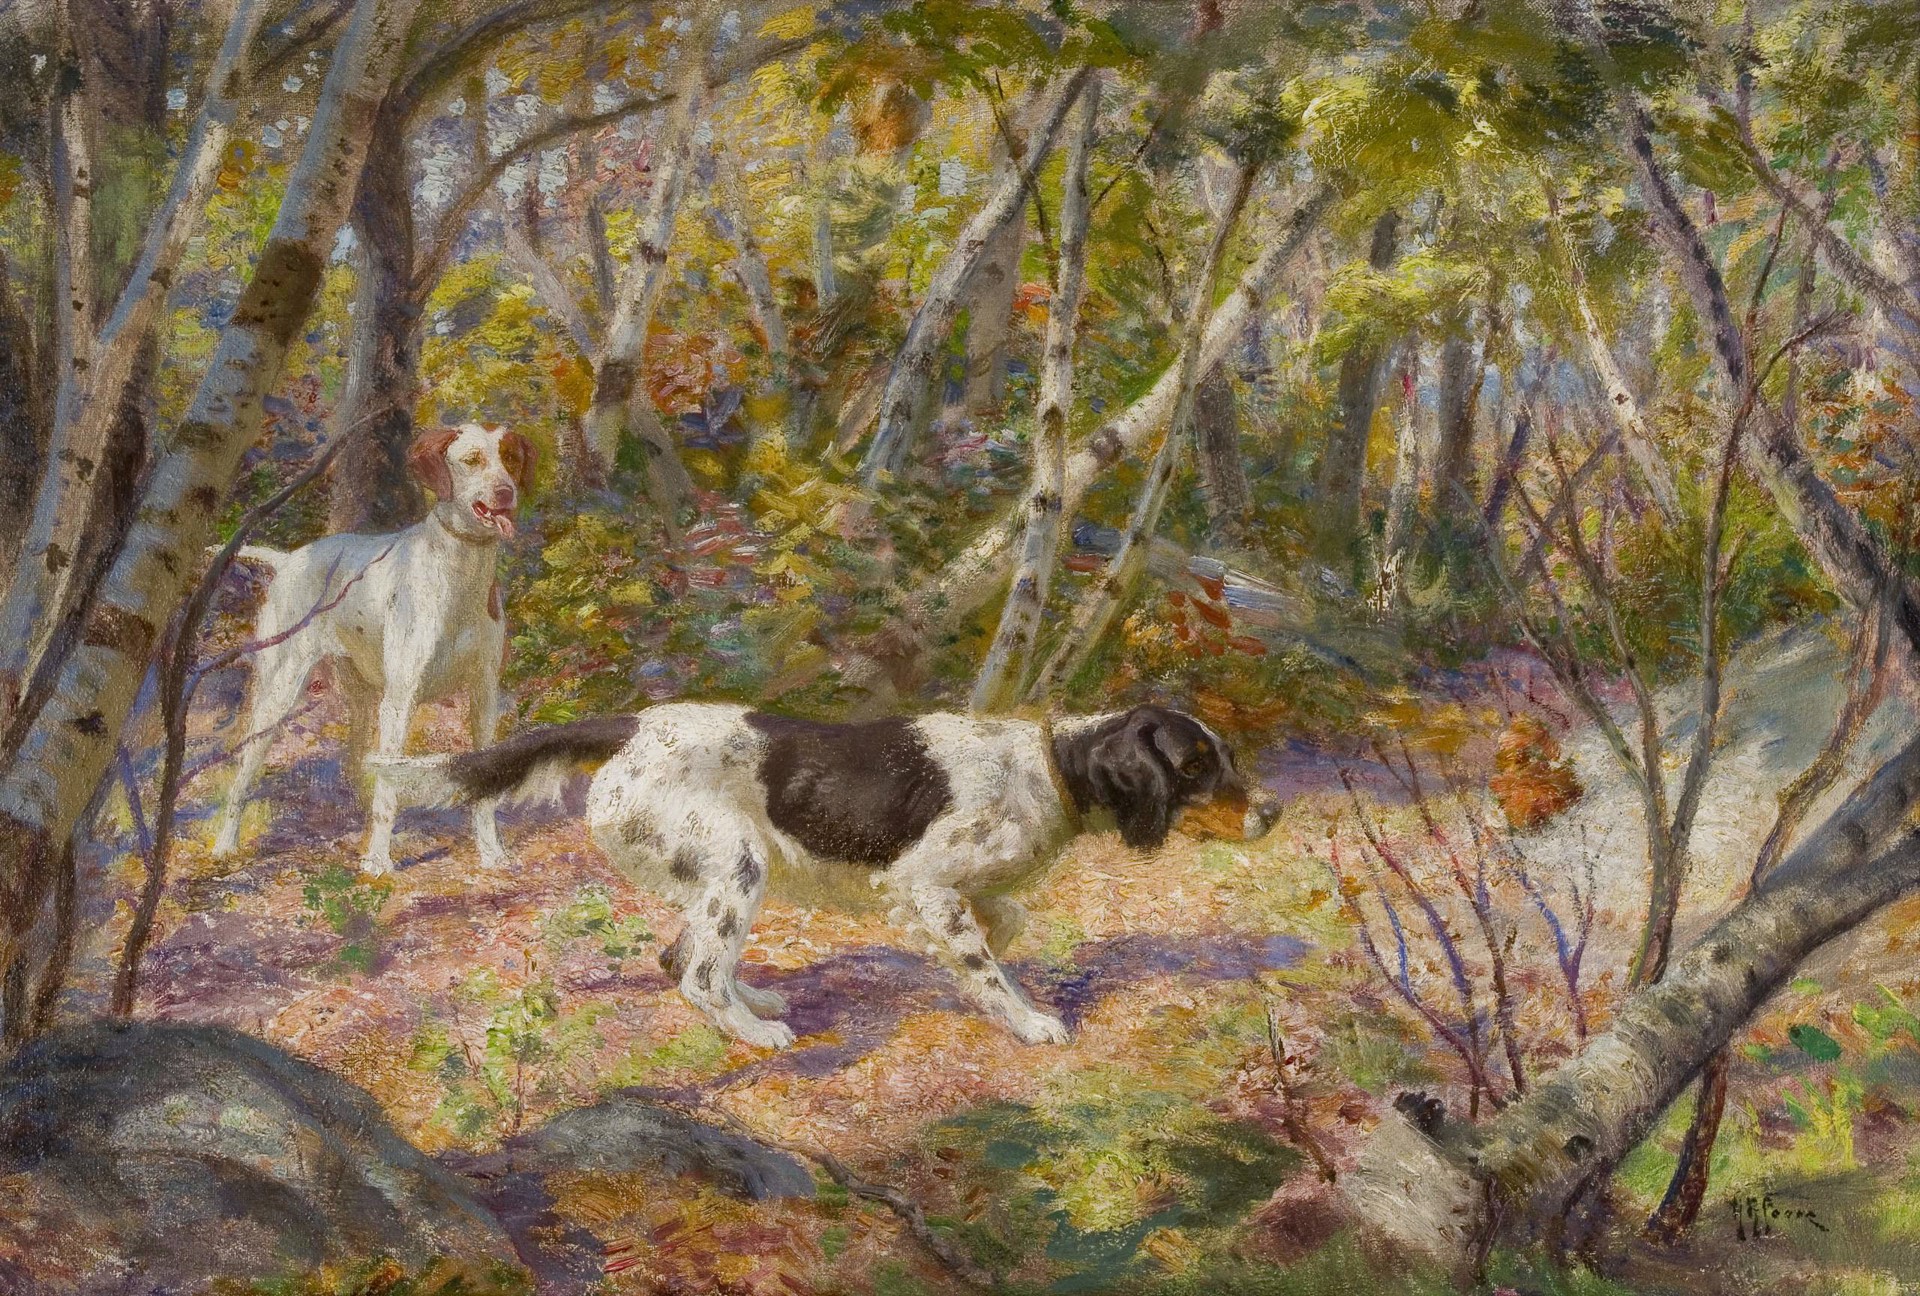 On Birds, 1915 by Henry Rankin Poore